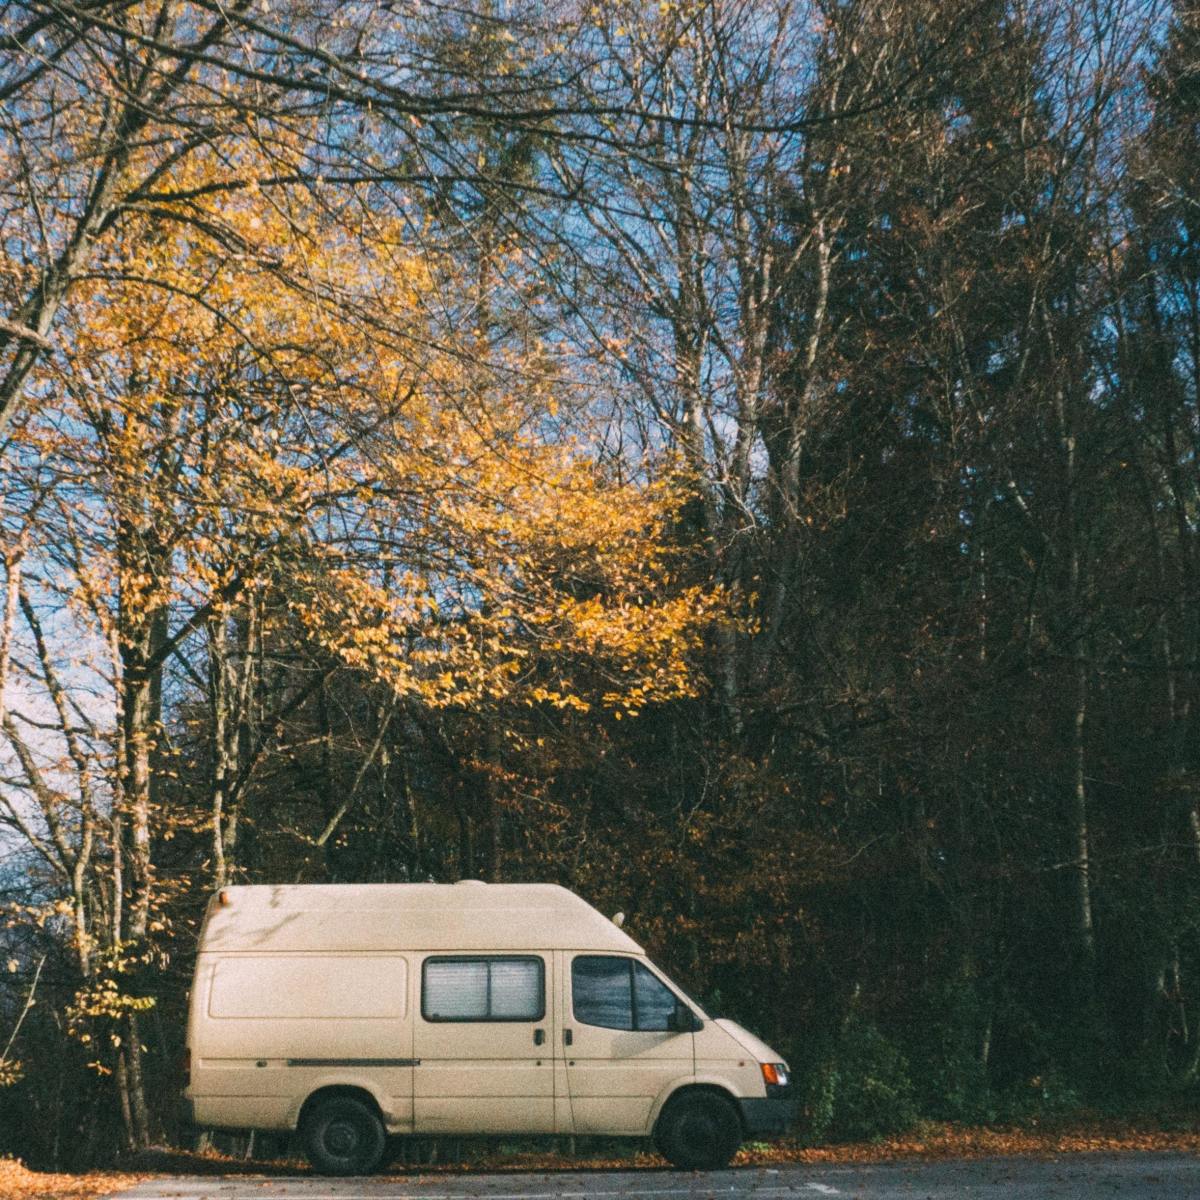 Use these proven methods to quickly rid your motor home, trailer, or camper of those nasty smells that make travel uncomfortable and selling impossible.